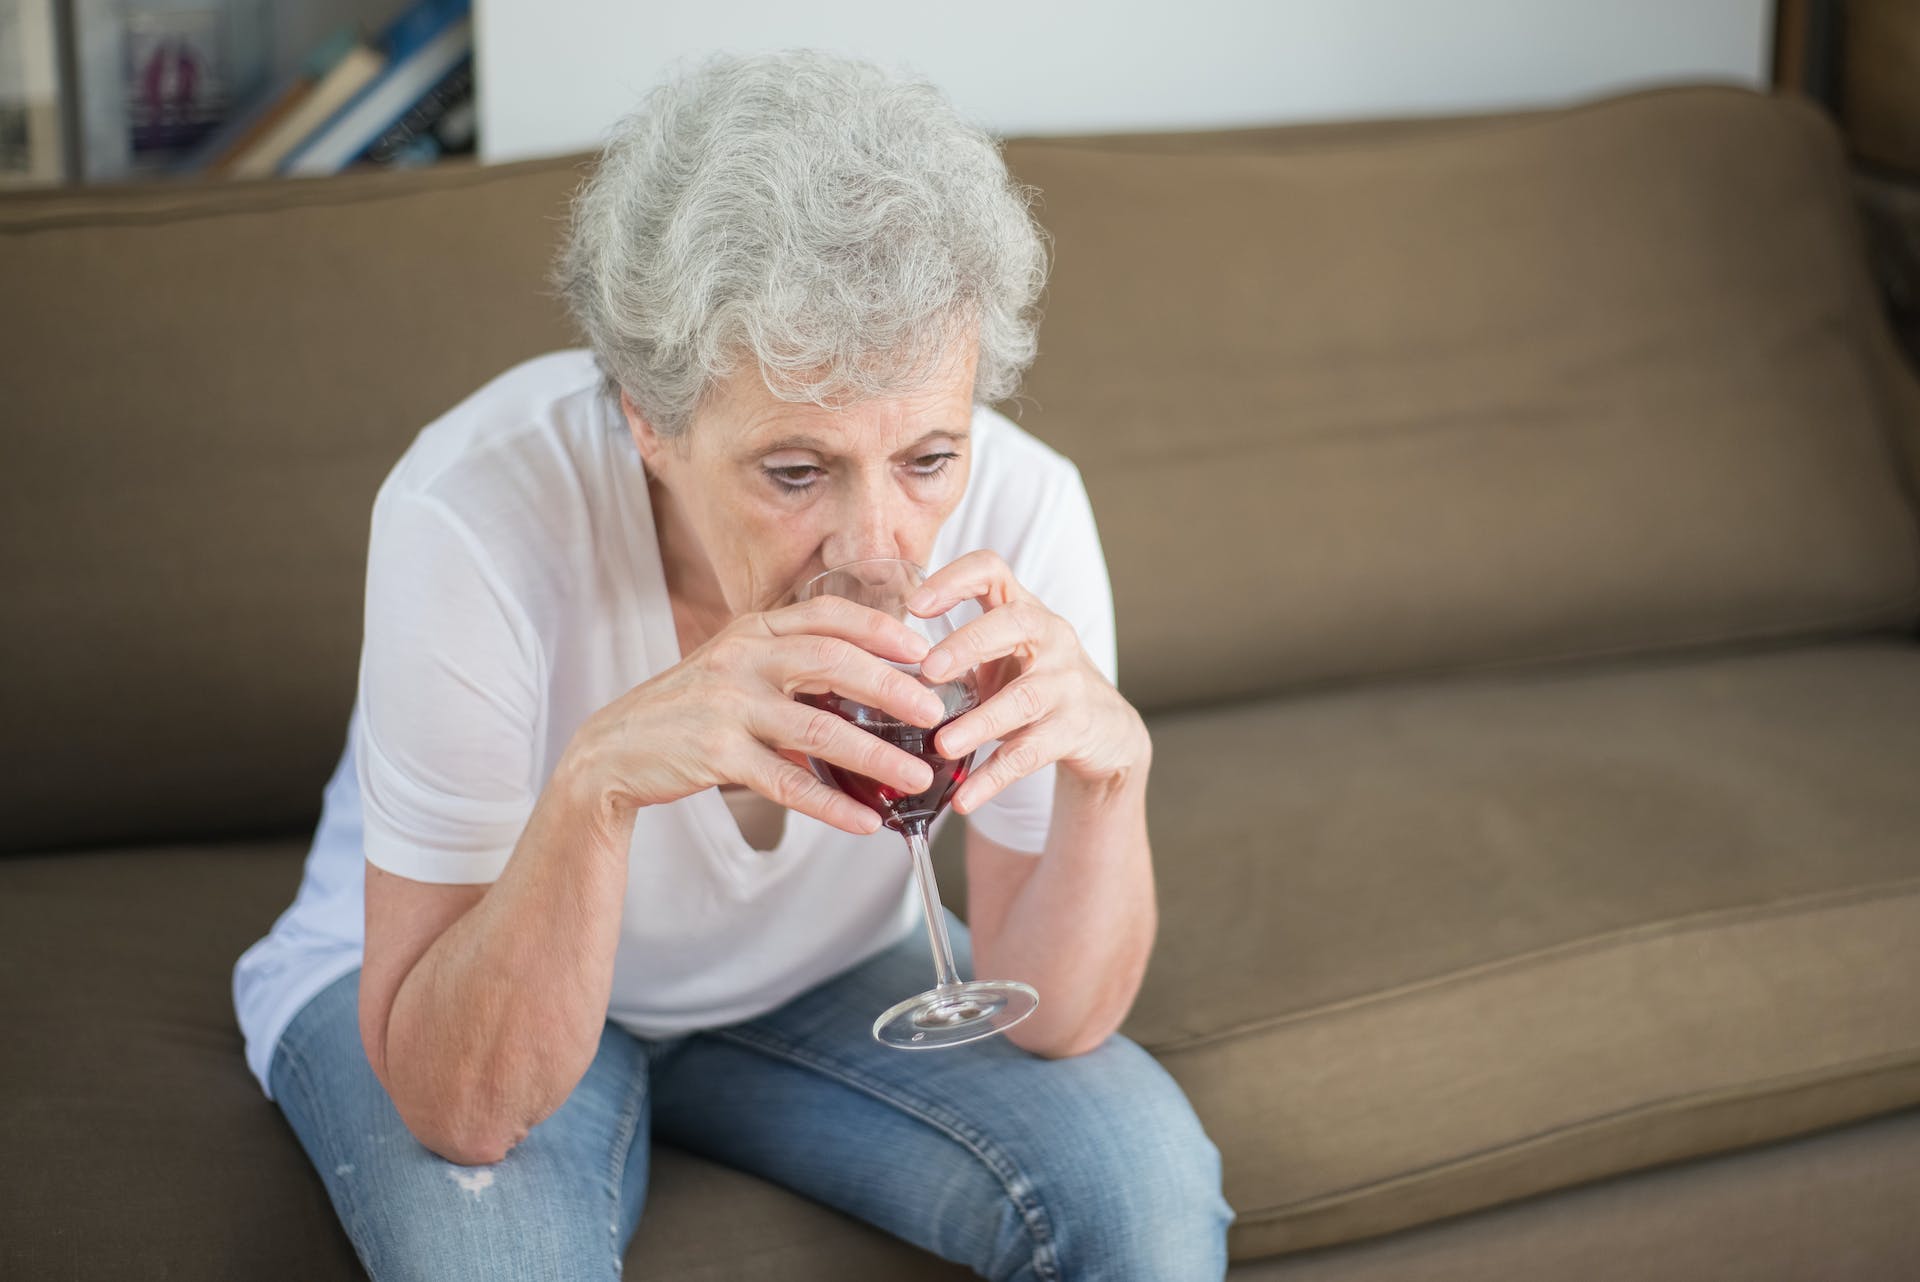 Old woman drinking wine | Source: Pexels